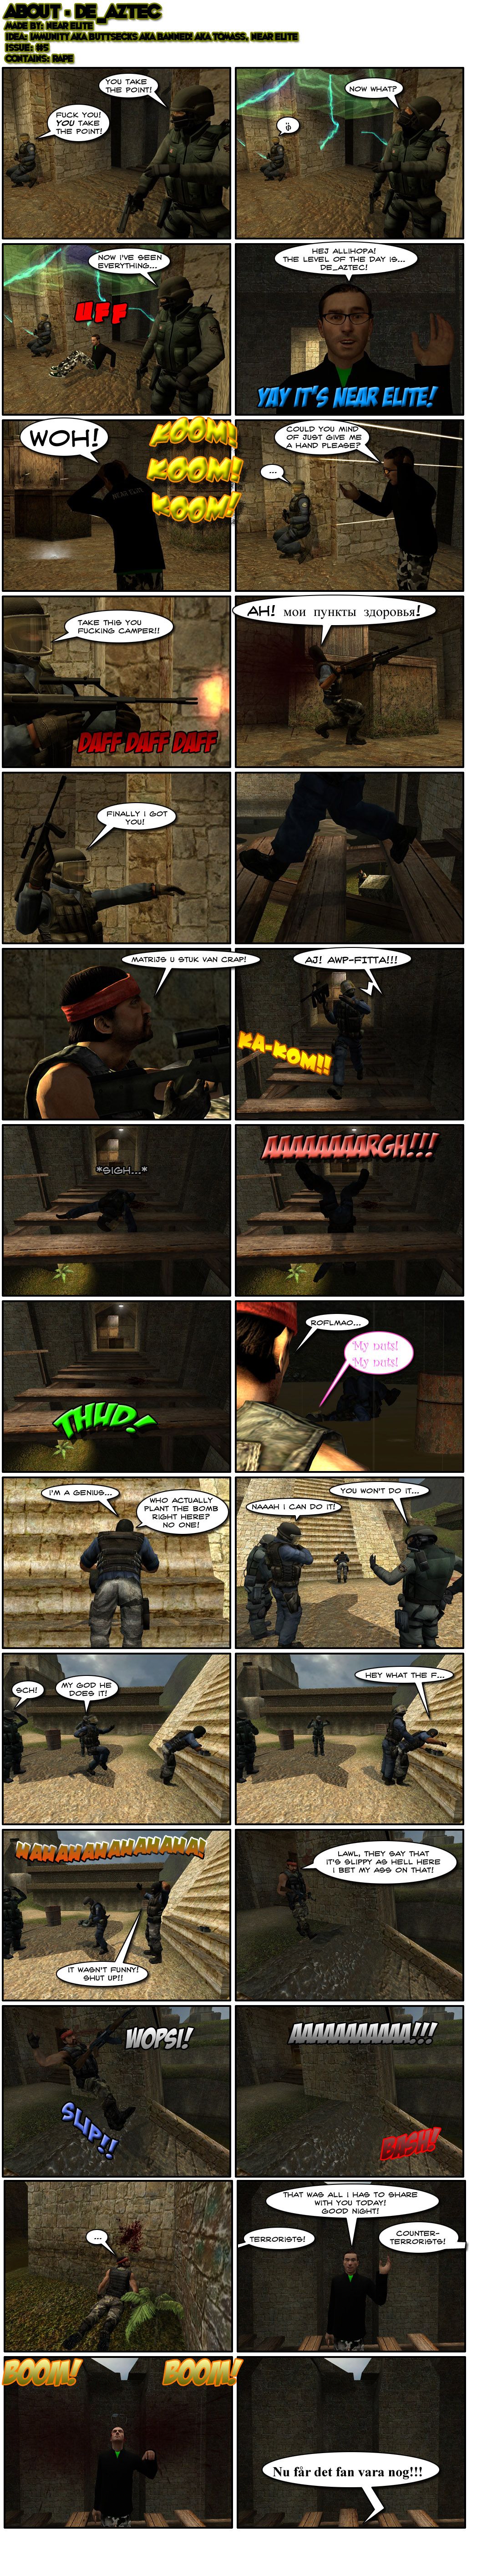 Two counter-terrorists on opposite sites of an opening are arguing over who takes point when a portal suddenly pops up above them and Near Elite falls out of it and in front of the opening. Near greets readers in Swedish and introduces the level as de_aztec, then starts getting shot at. He asks one of the counter-terrorists to give him a hand and the counter-terrorist starts spraying, hitting a camper in the head. The counter-terrorist celebrates his kill and crosses the opening, getting on a narrow rickety bridge. Another terrorist spots him from below and shoots him, making him fall onto the bridge. The counter-terrorist sighs, then slips from the bridge and falls to the ground with a scream. The terrorist laughs out loud as the counter-terrorist whimpers about his nuts. Elsewhere, a terrorist is planting a bomb at the bottom of the steps of a pyramid, calling himself a genius for planting the bomb where nobody does. Cut to three terrorists looking at the terrorist's behind, one daring another. The counter-terrorist then tiptoes towards the terrorist as the others grow excited. The counter-terrorist bumps his groin on the terrorist's behind, surprising him. The counter-terrorists all laugh then as the terrorist embarrassedly tells them to shut up and that it wasn't funny. Meanwhile, a terrorist approaches a ramp, noting with a laugh that they say it's slippy as hell there and that he bets his ass on that. He then slips down the ramp, hitting a wall with his head. In the middle of the bridge, Near Elite then says that was all he had to share with the reader today and wishes them good night. Then, from both sides of the bridge, the terrorists and counter-terrorists spot each other and shoot, both hitting Near Elite on the head. Falling down, Near curses them in Swedish. The end.